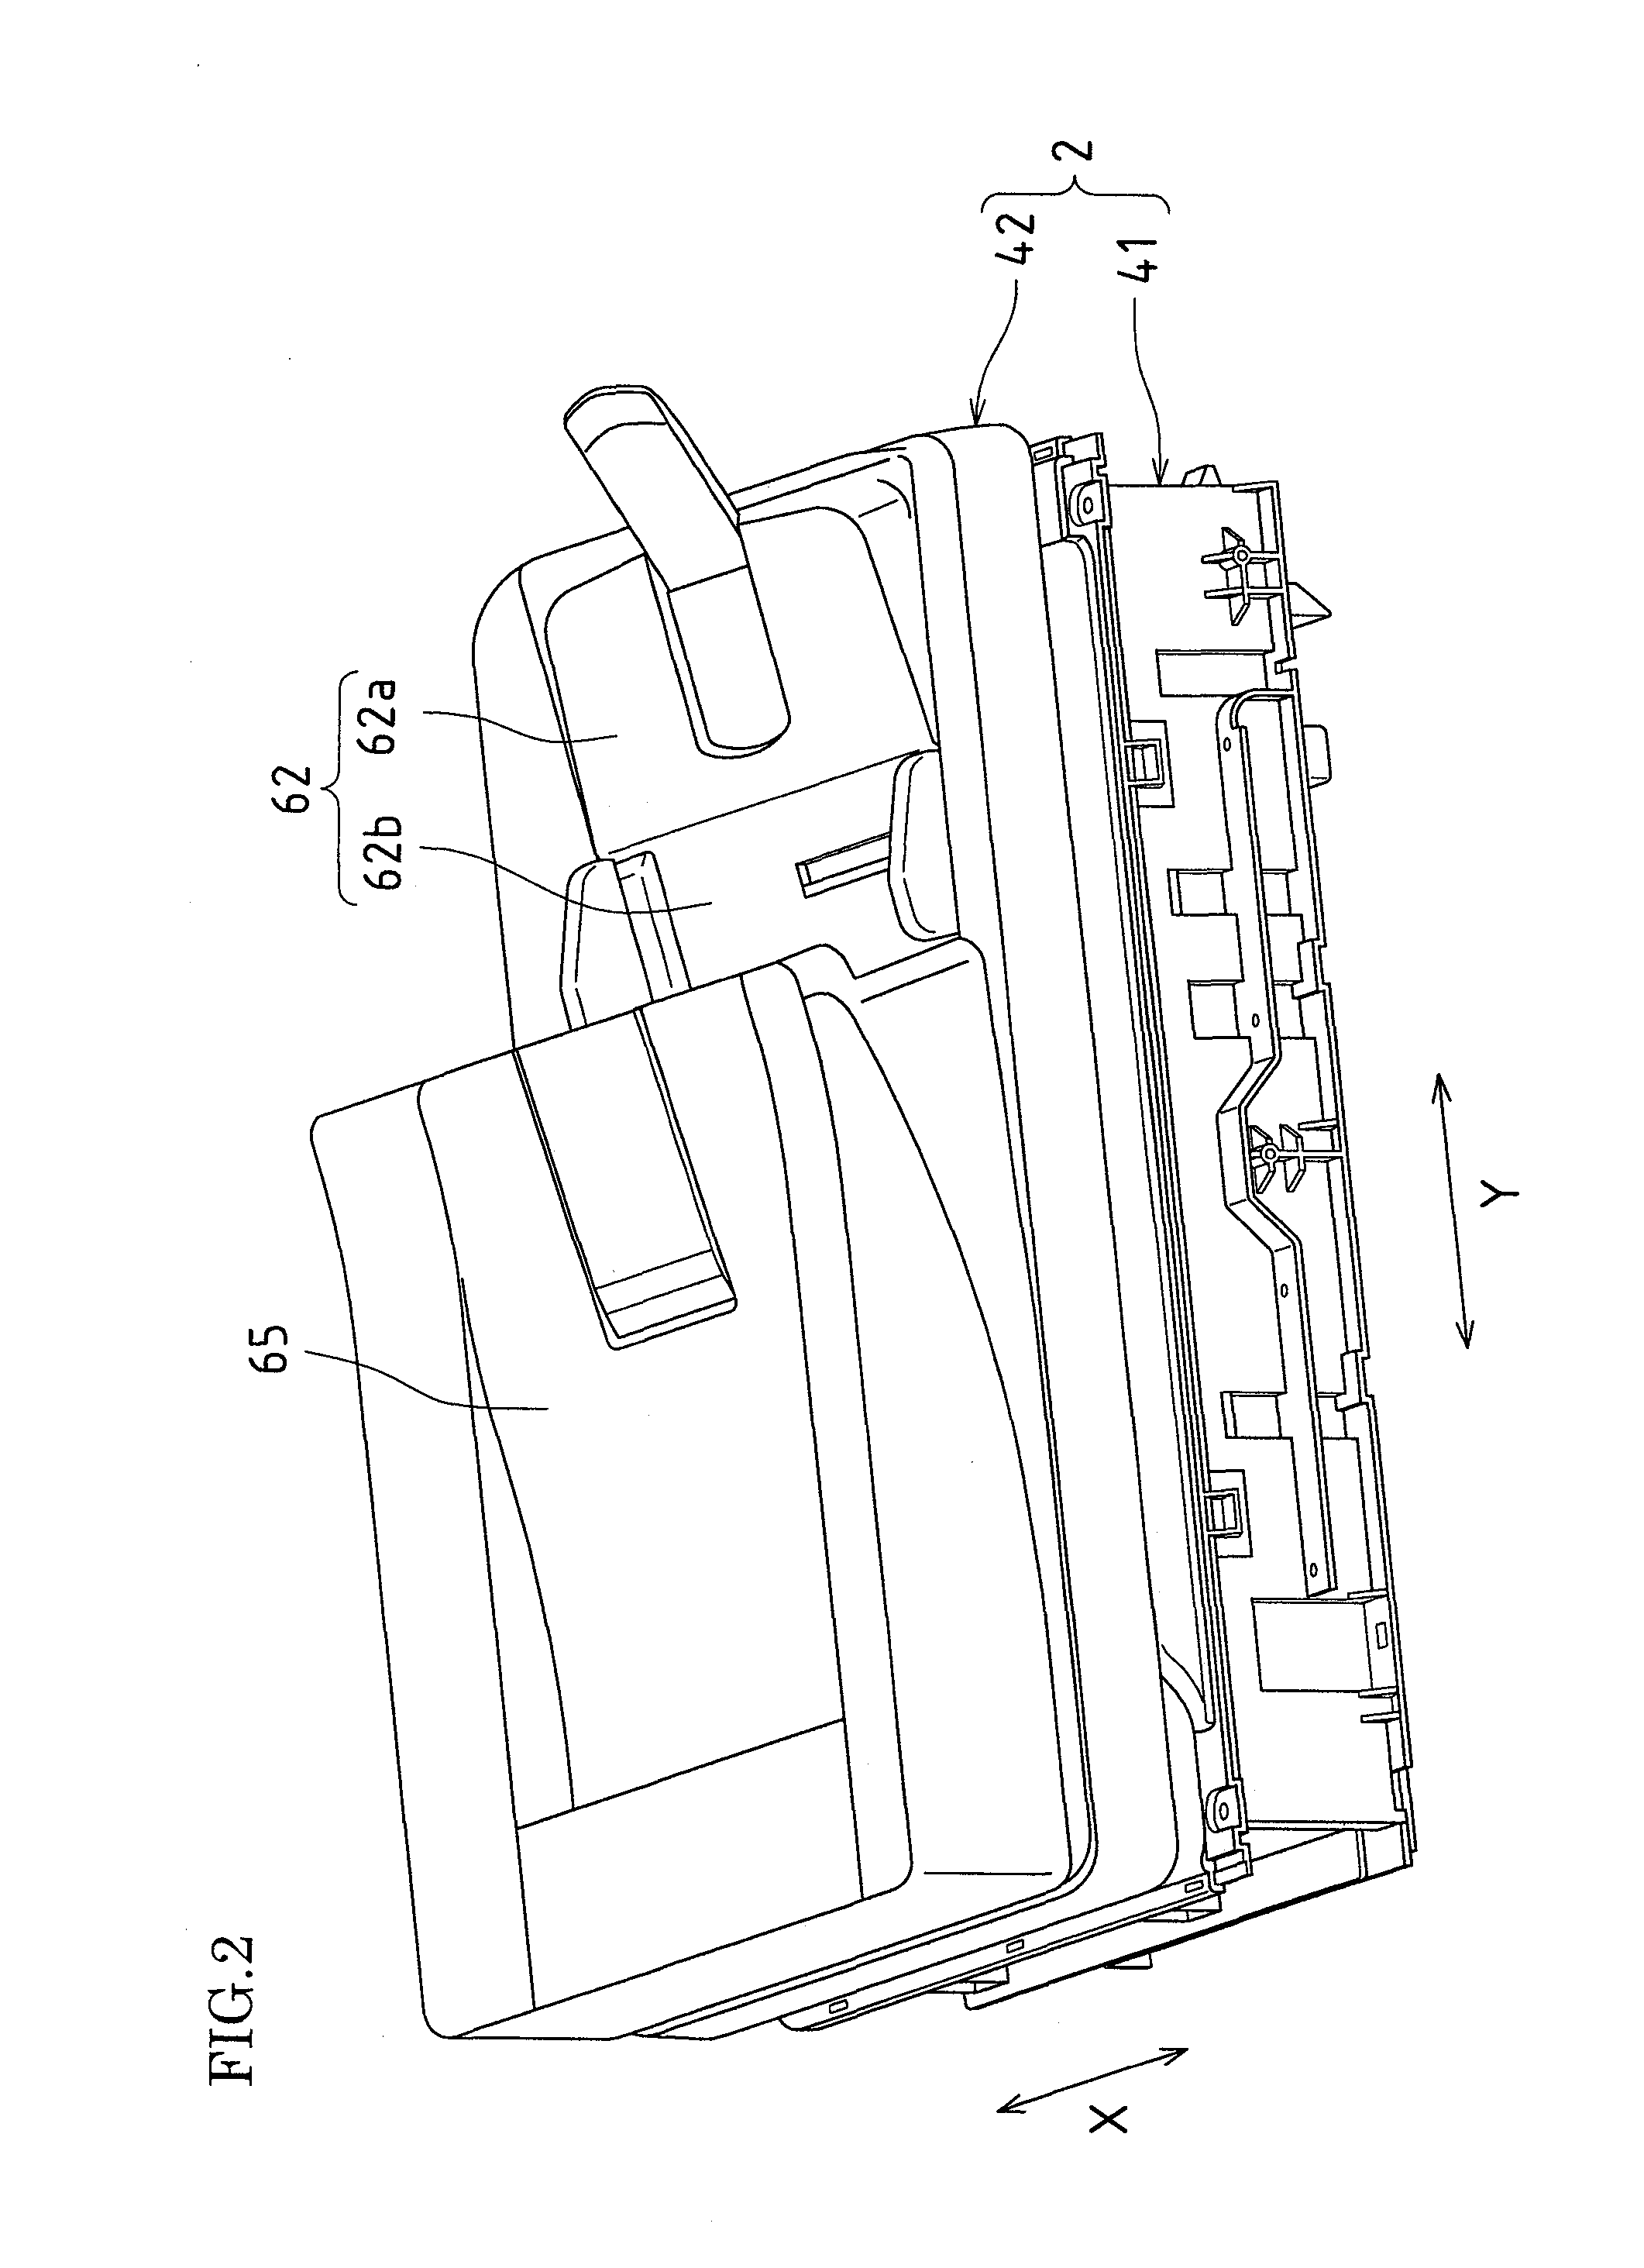 Image reading apparatus and image forming apparatus including the same